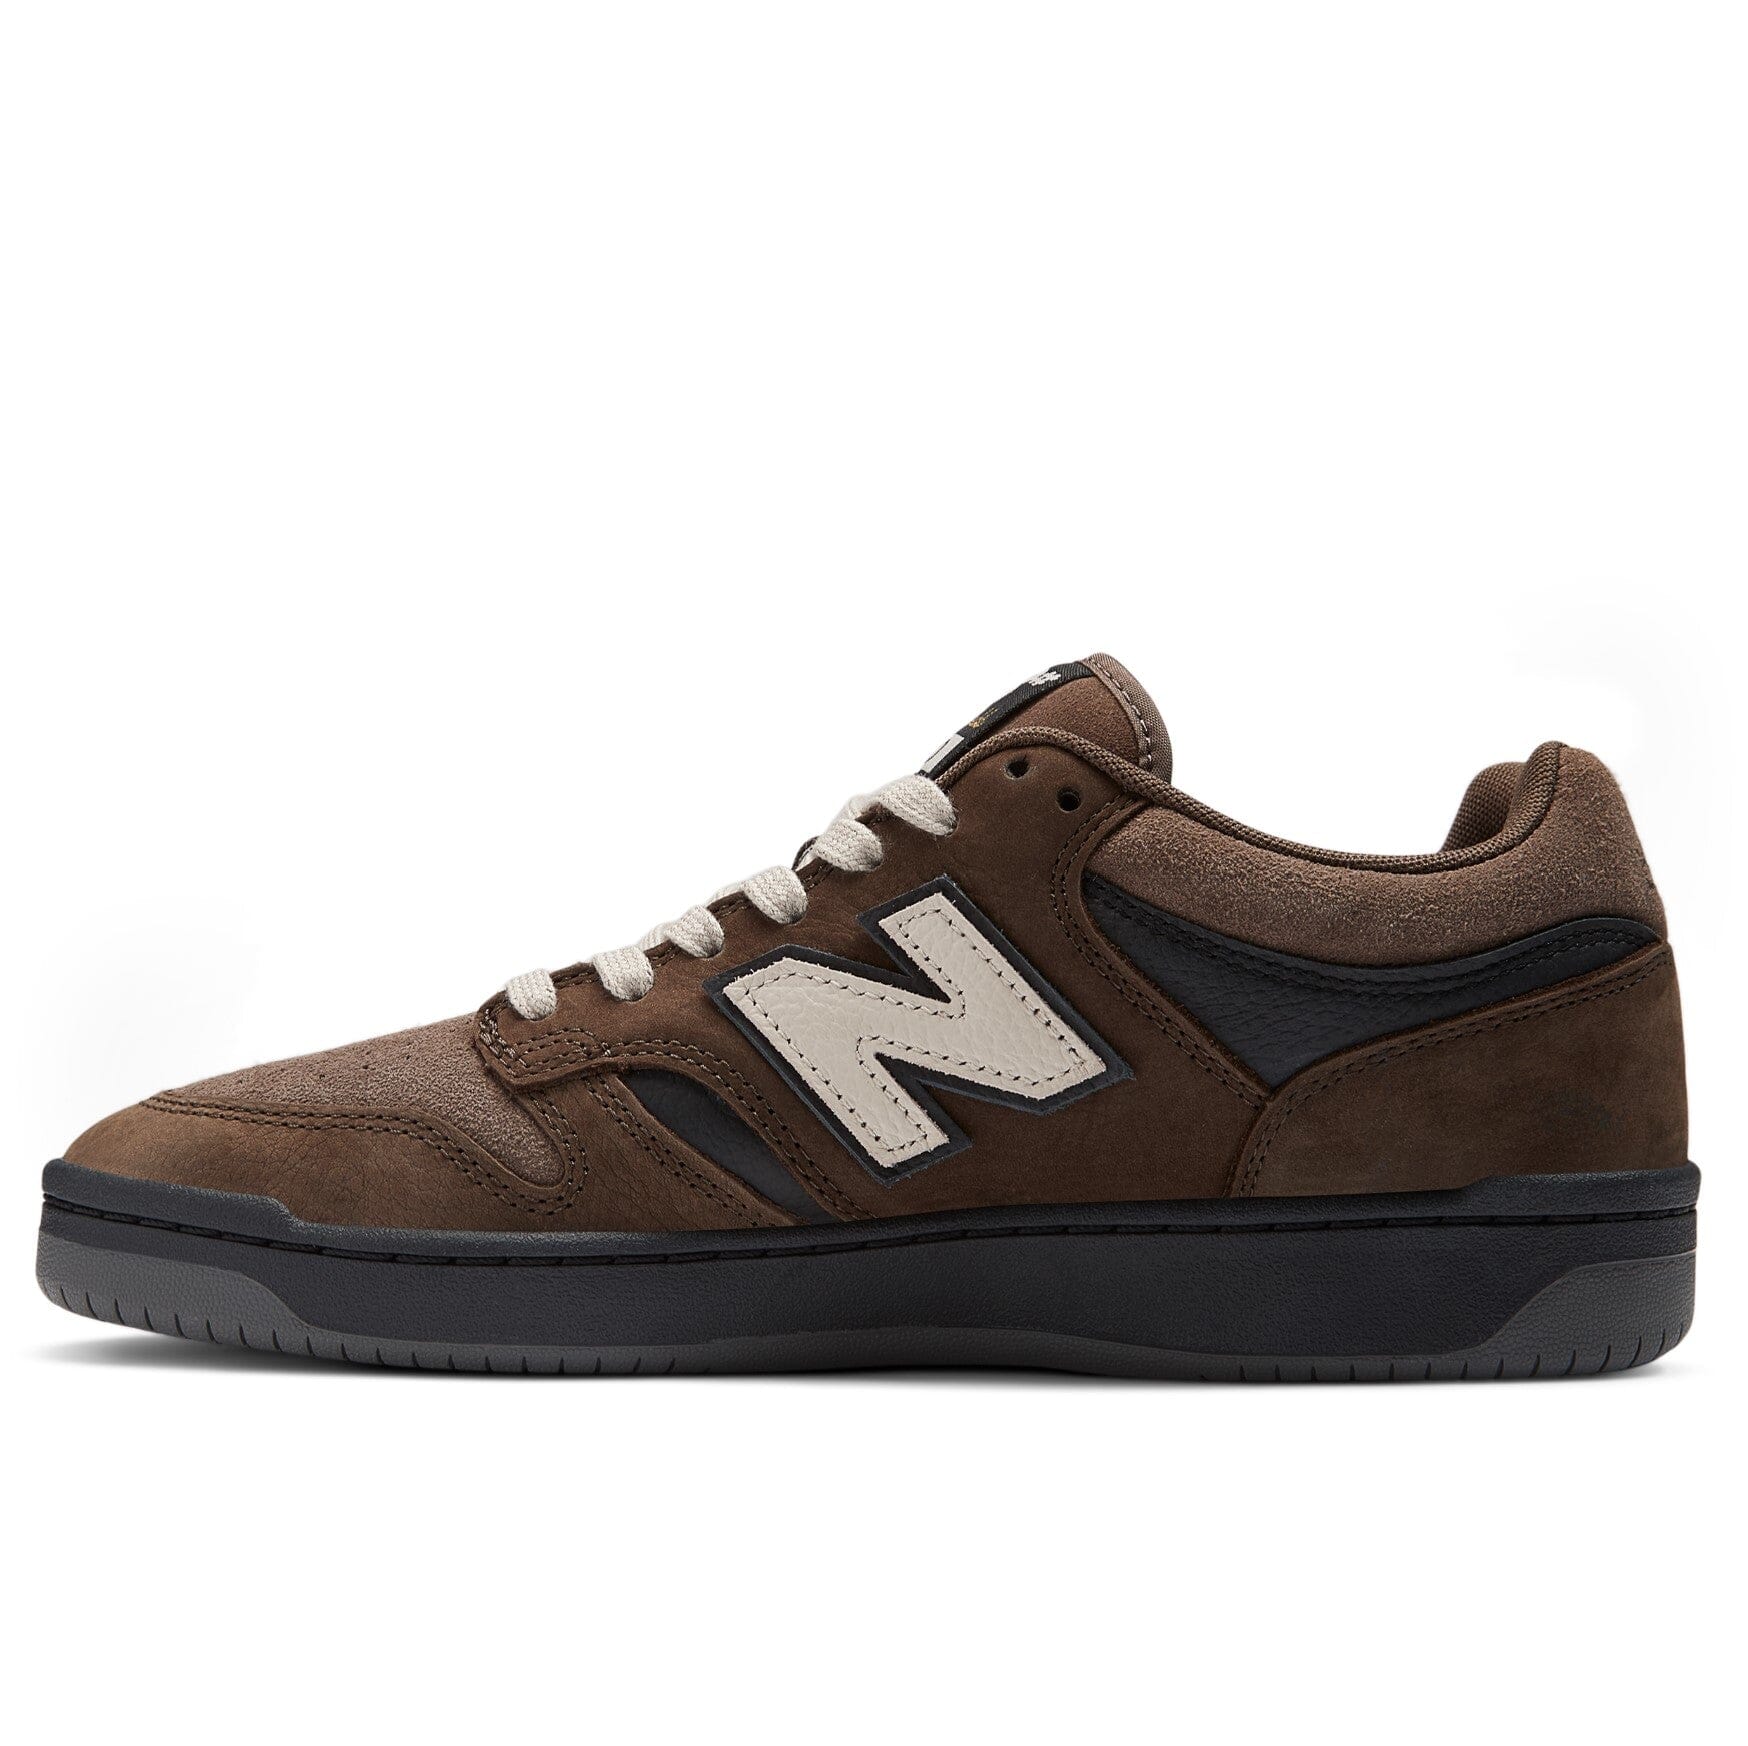 NB NUMERIC 480 Andrew Reynolds Shoes Chocolate/Black Men's Skate Shoes New Balance 